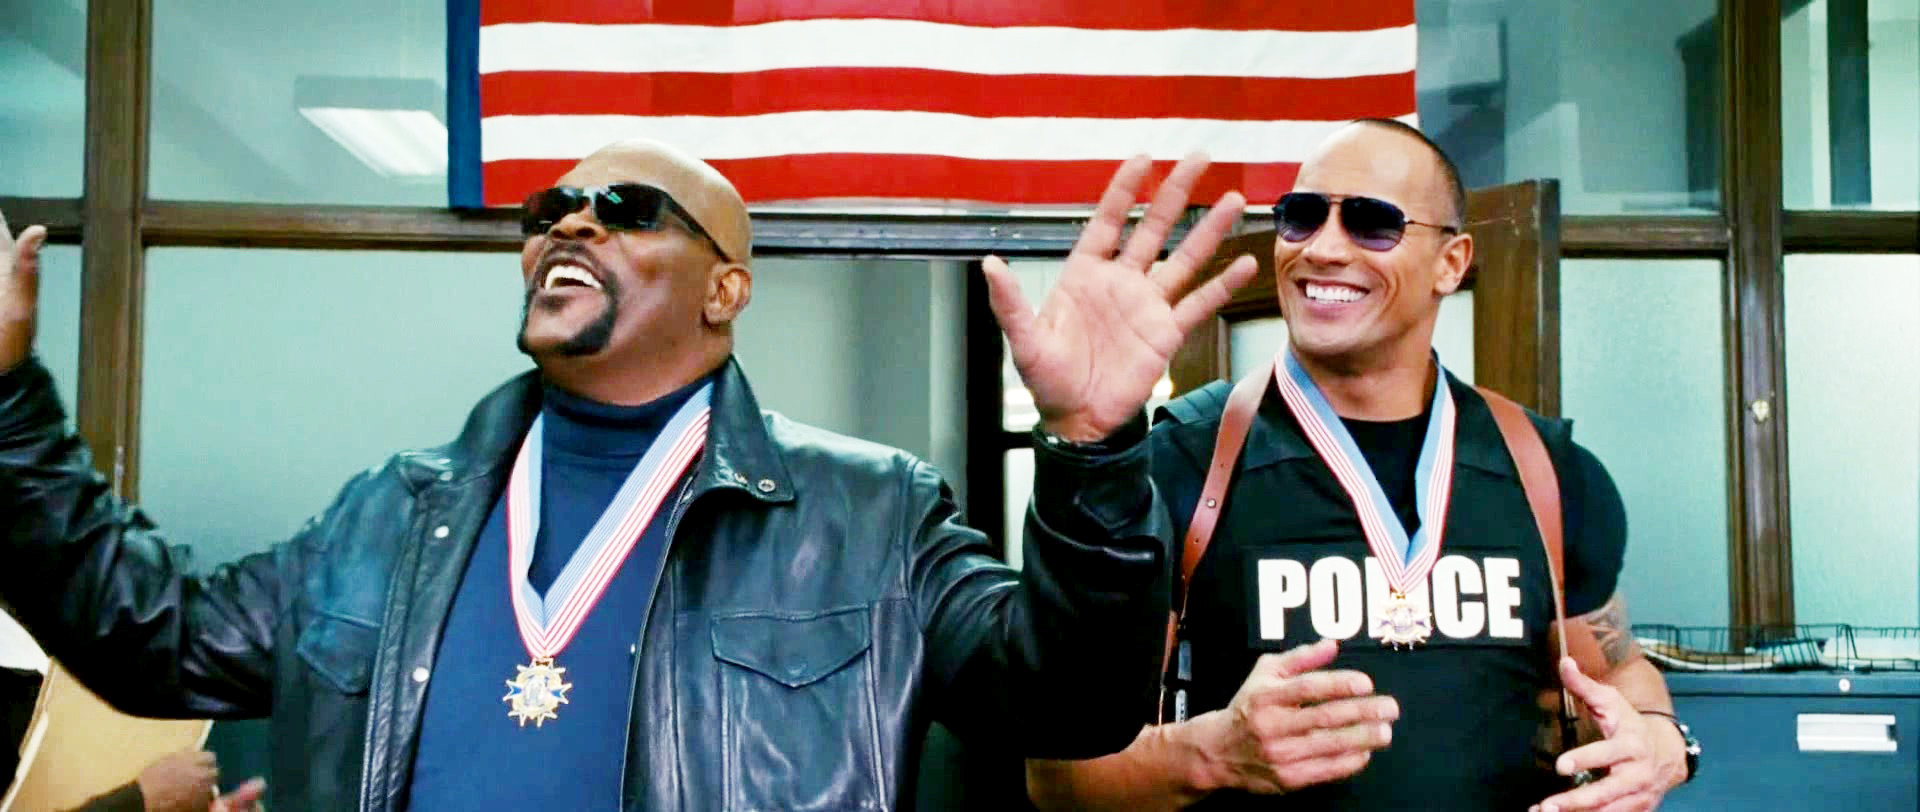 Samuel L. Jackson stars as Highsmith and The Rock stars as Danson in Columbia Pictures' The Other Guys (2010)